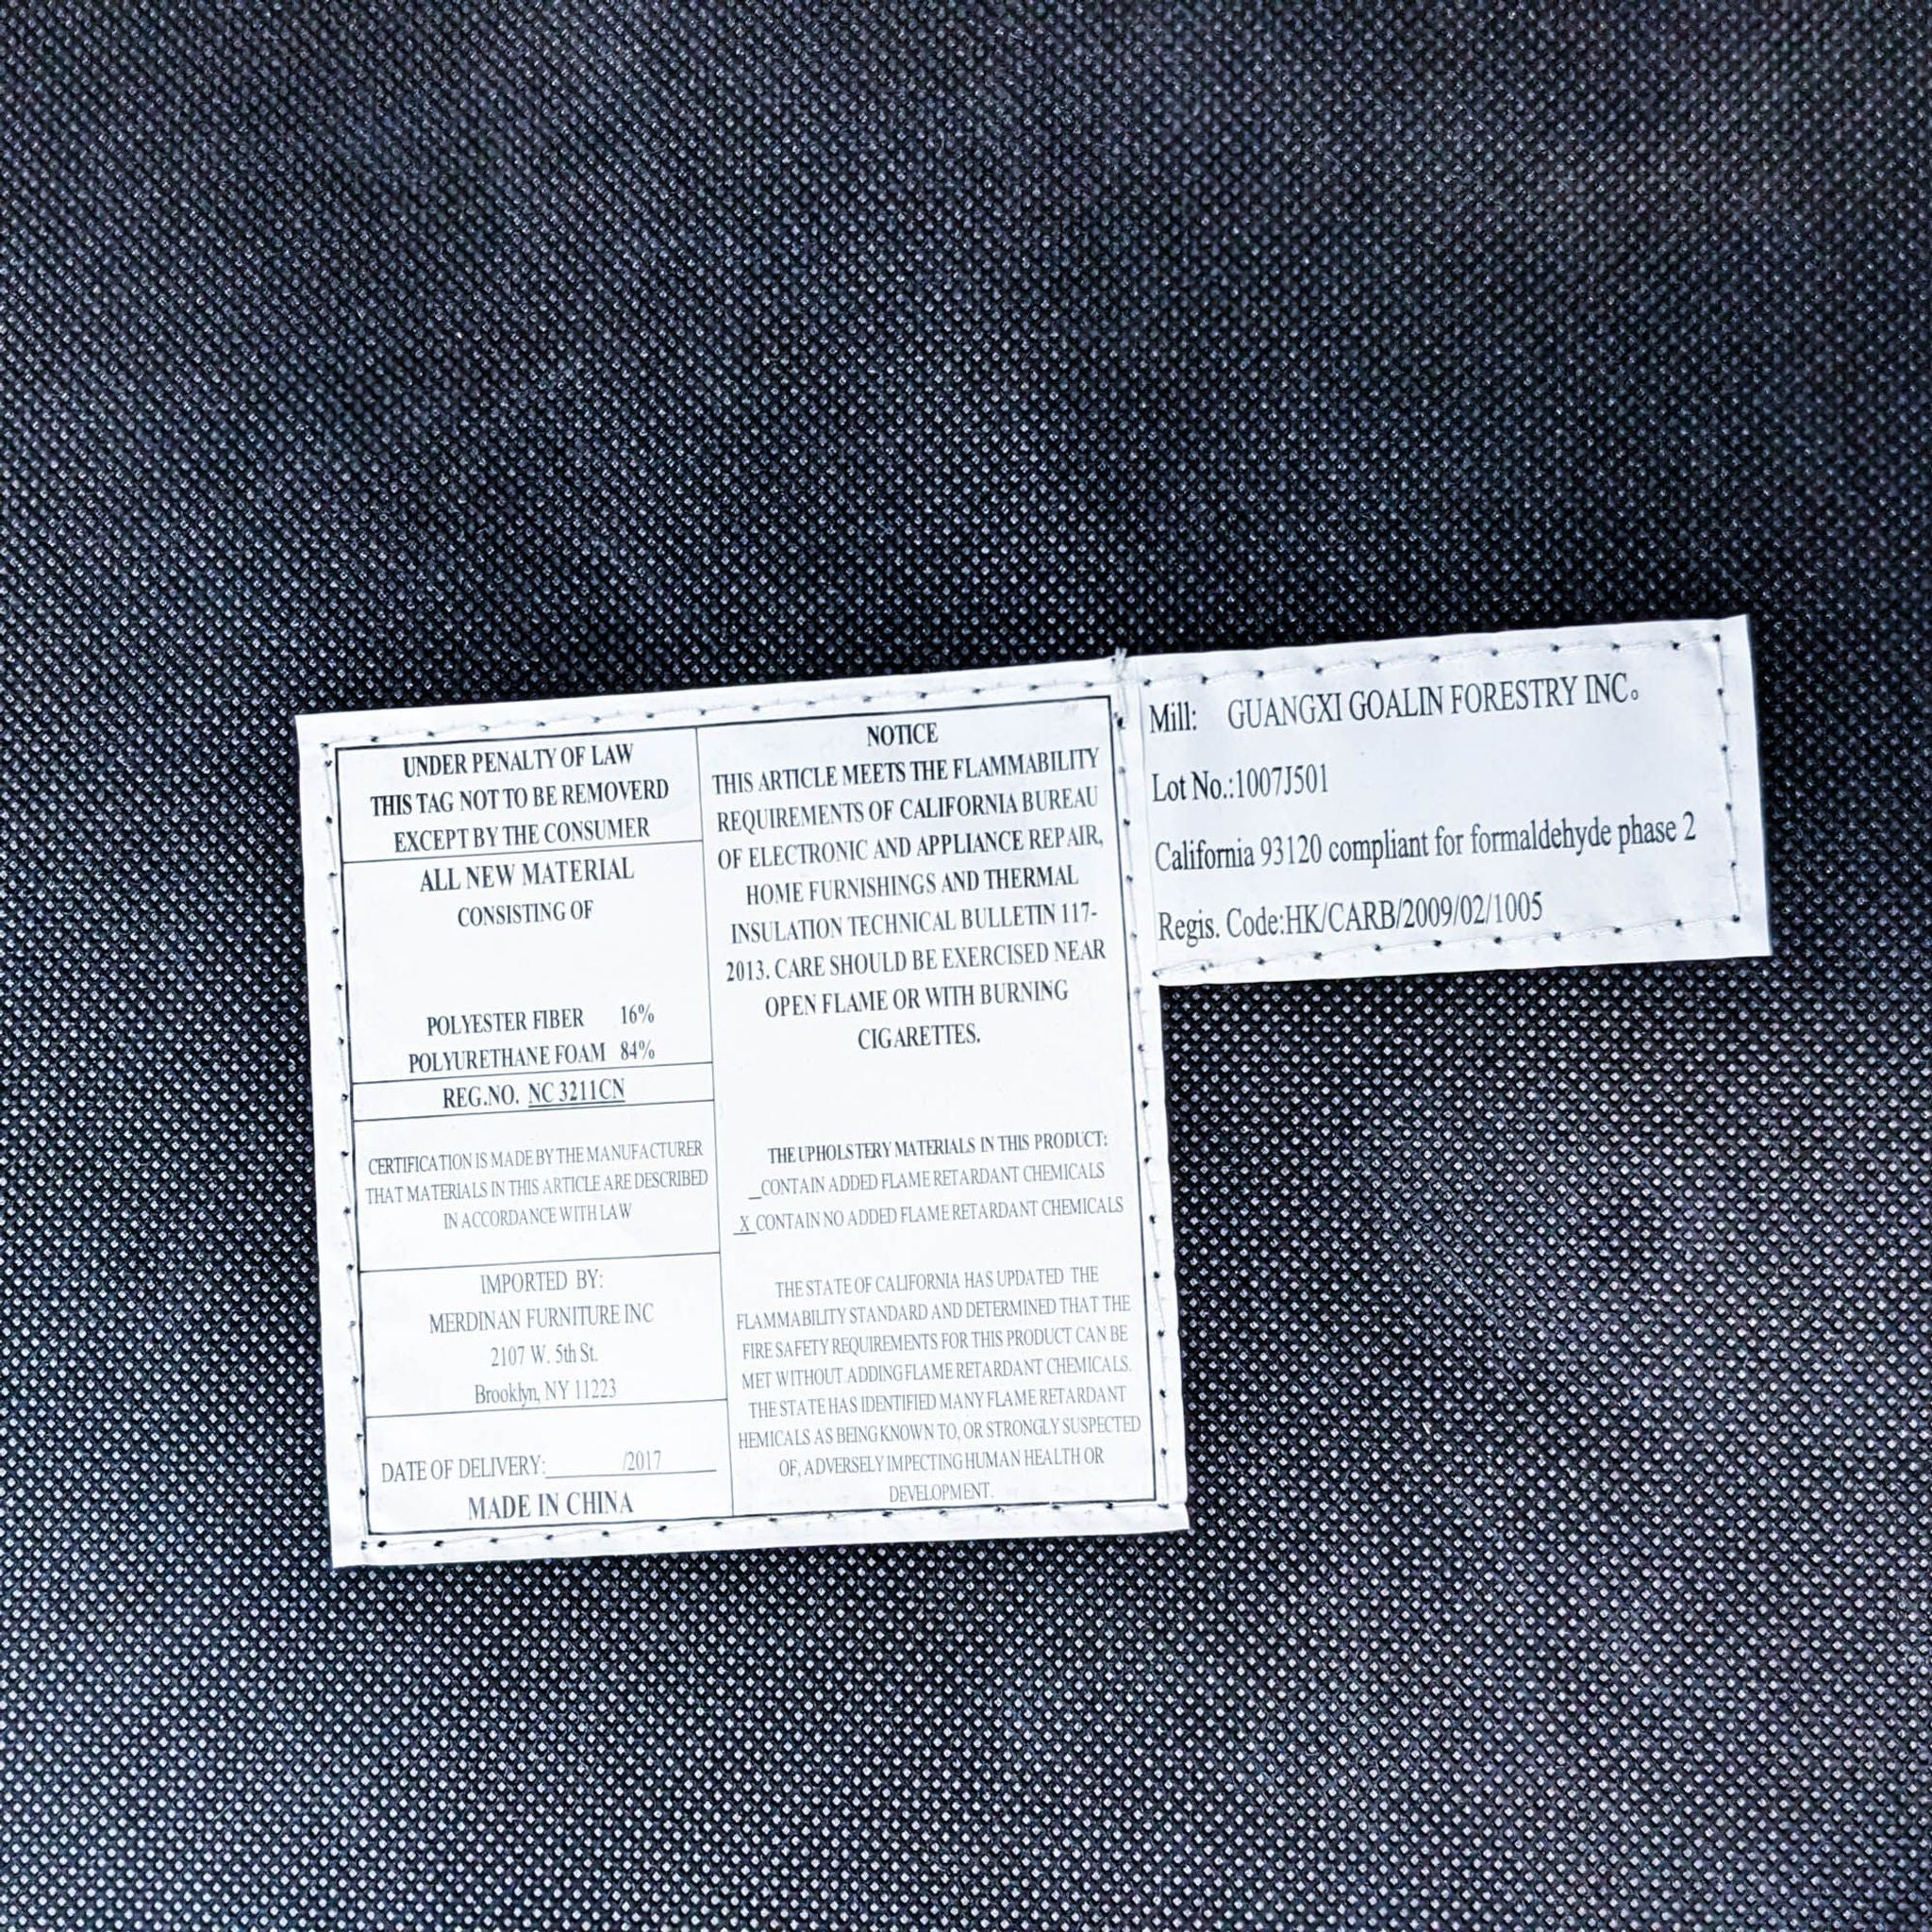 Label affixed under the chair with legal and product information, indicating Meridian Furniture as the importer.